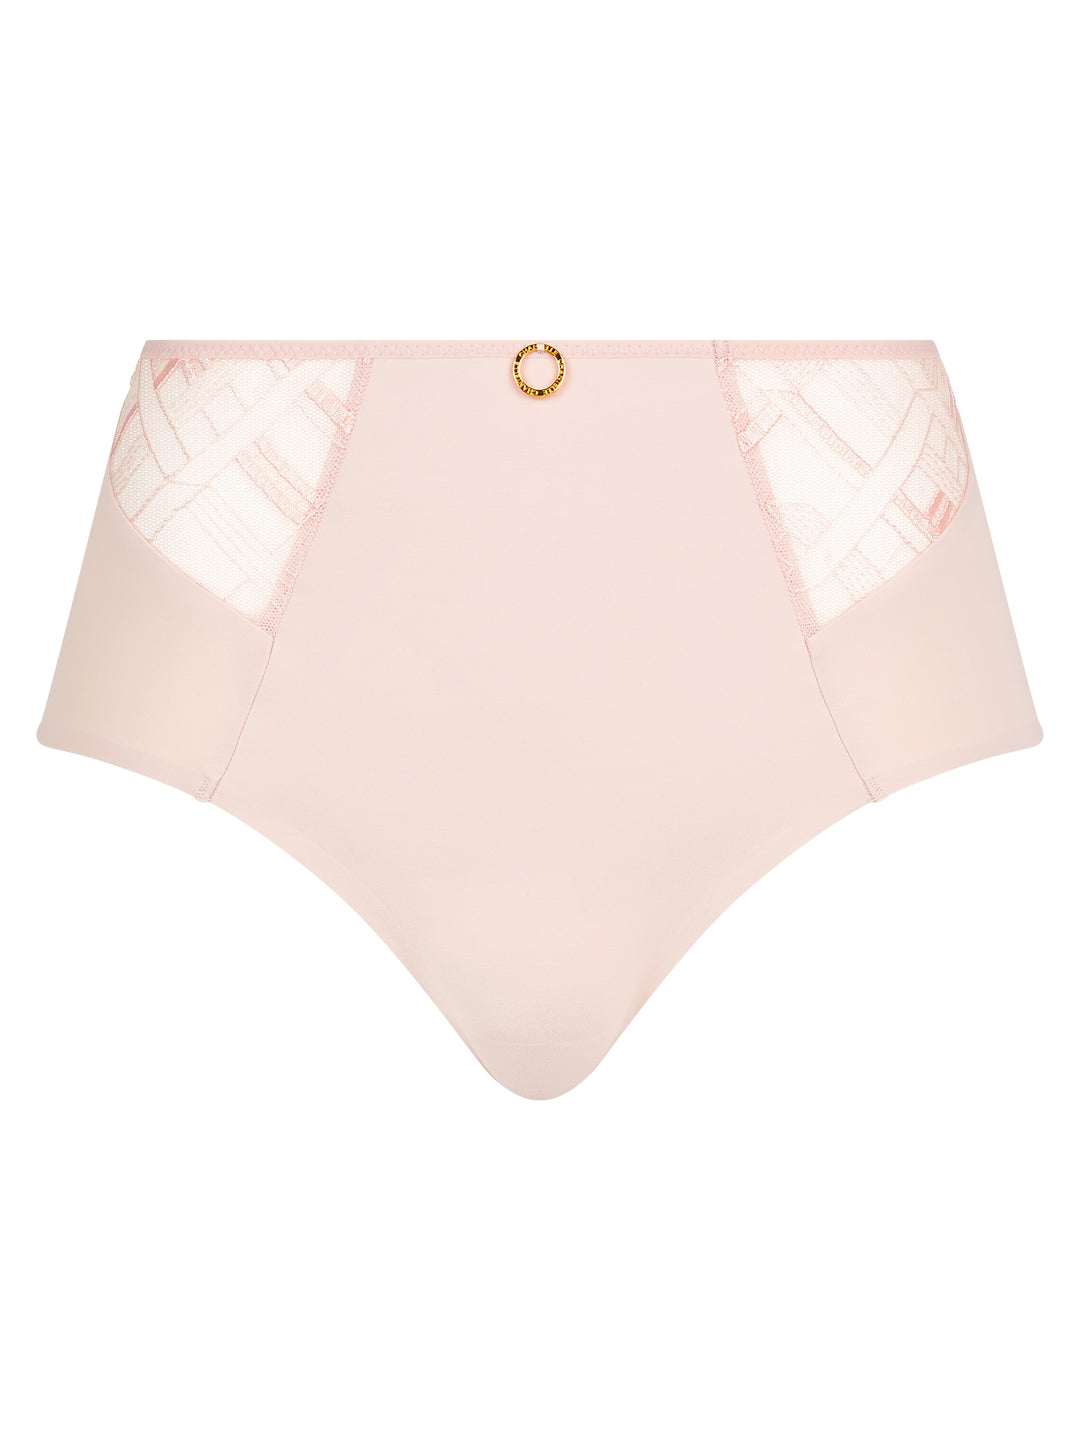 Chantelle Graphic Support Full Brief